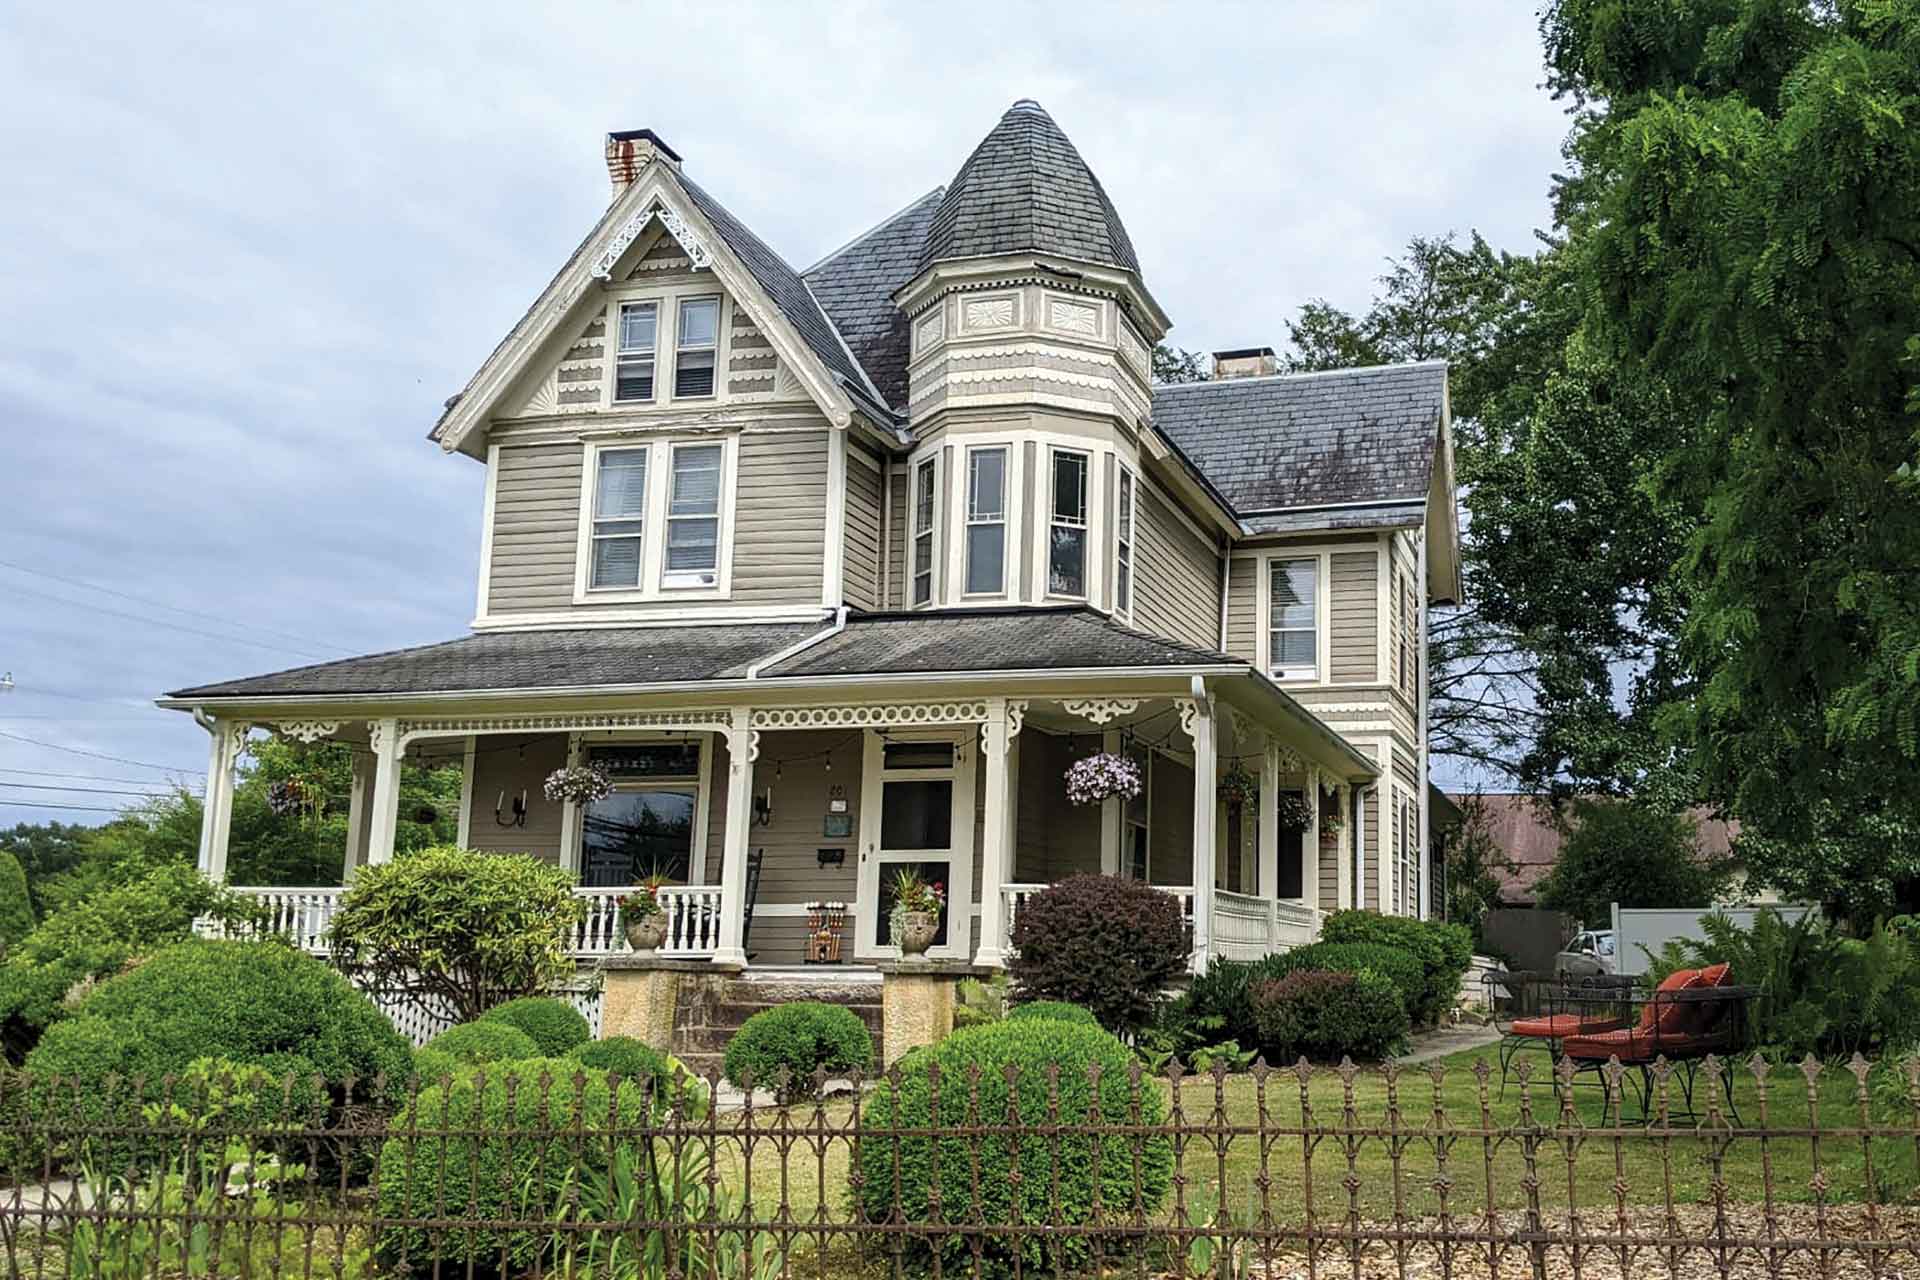 A grand, Victorian-style home.